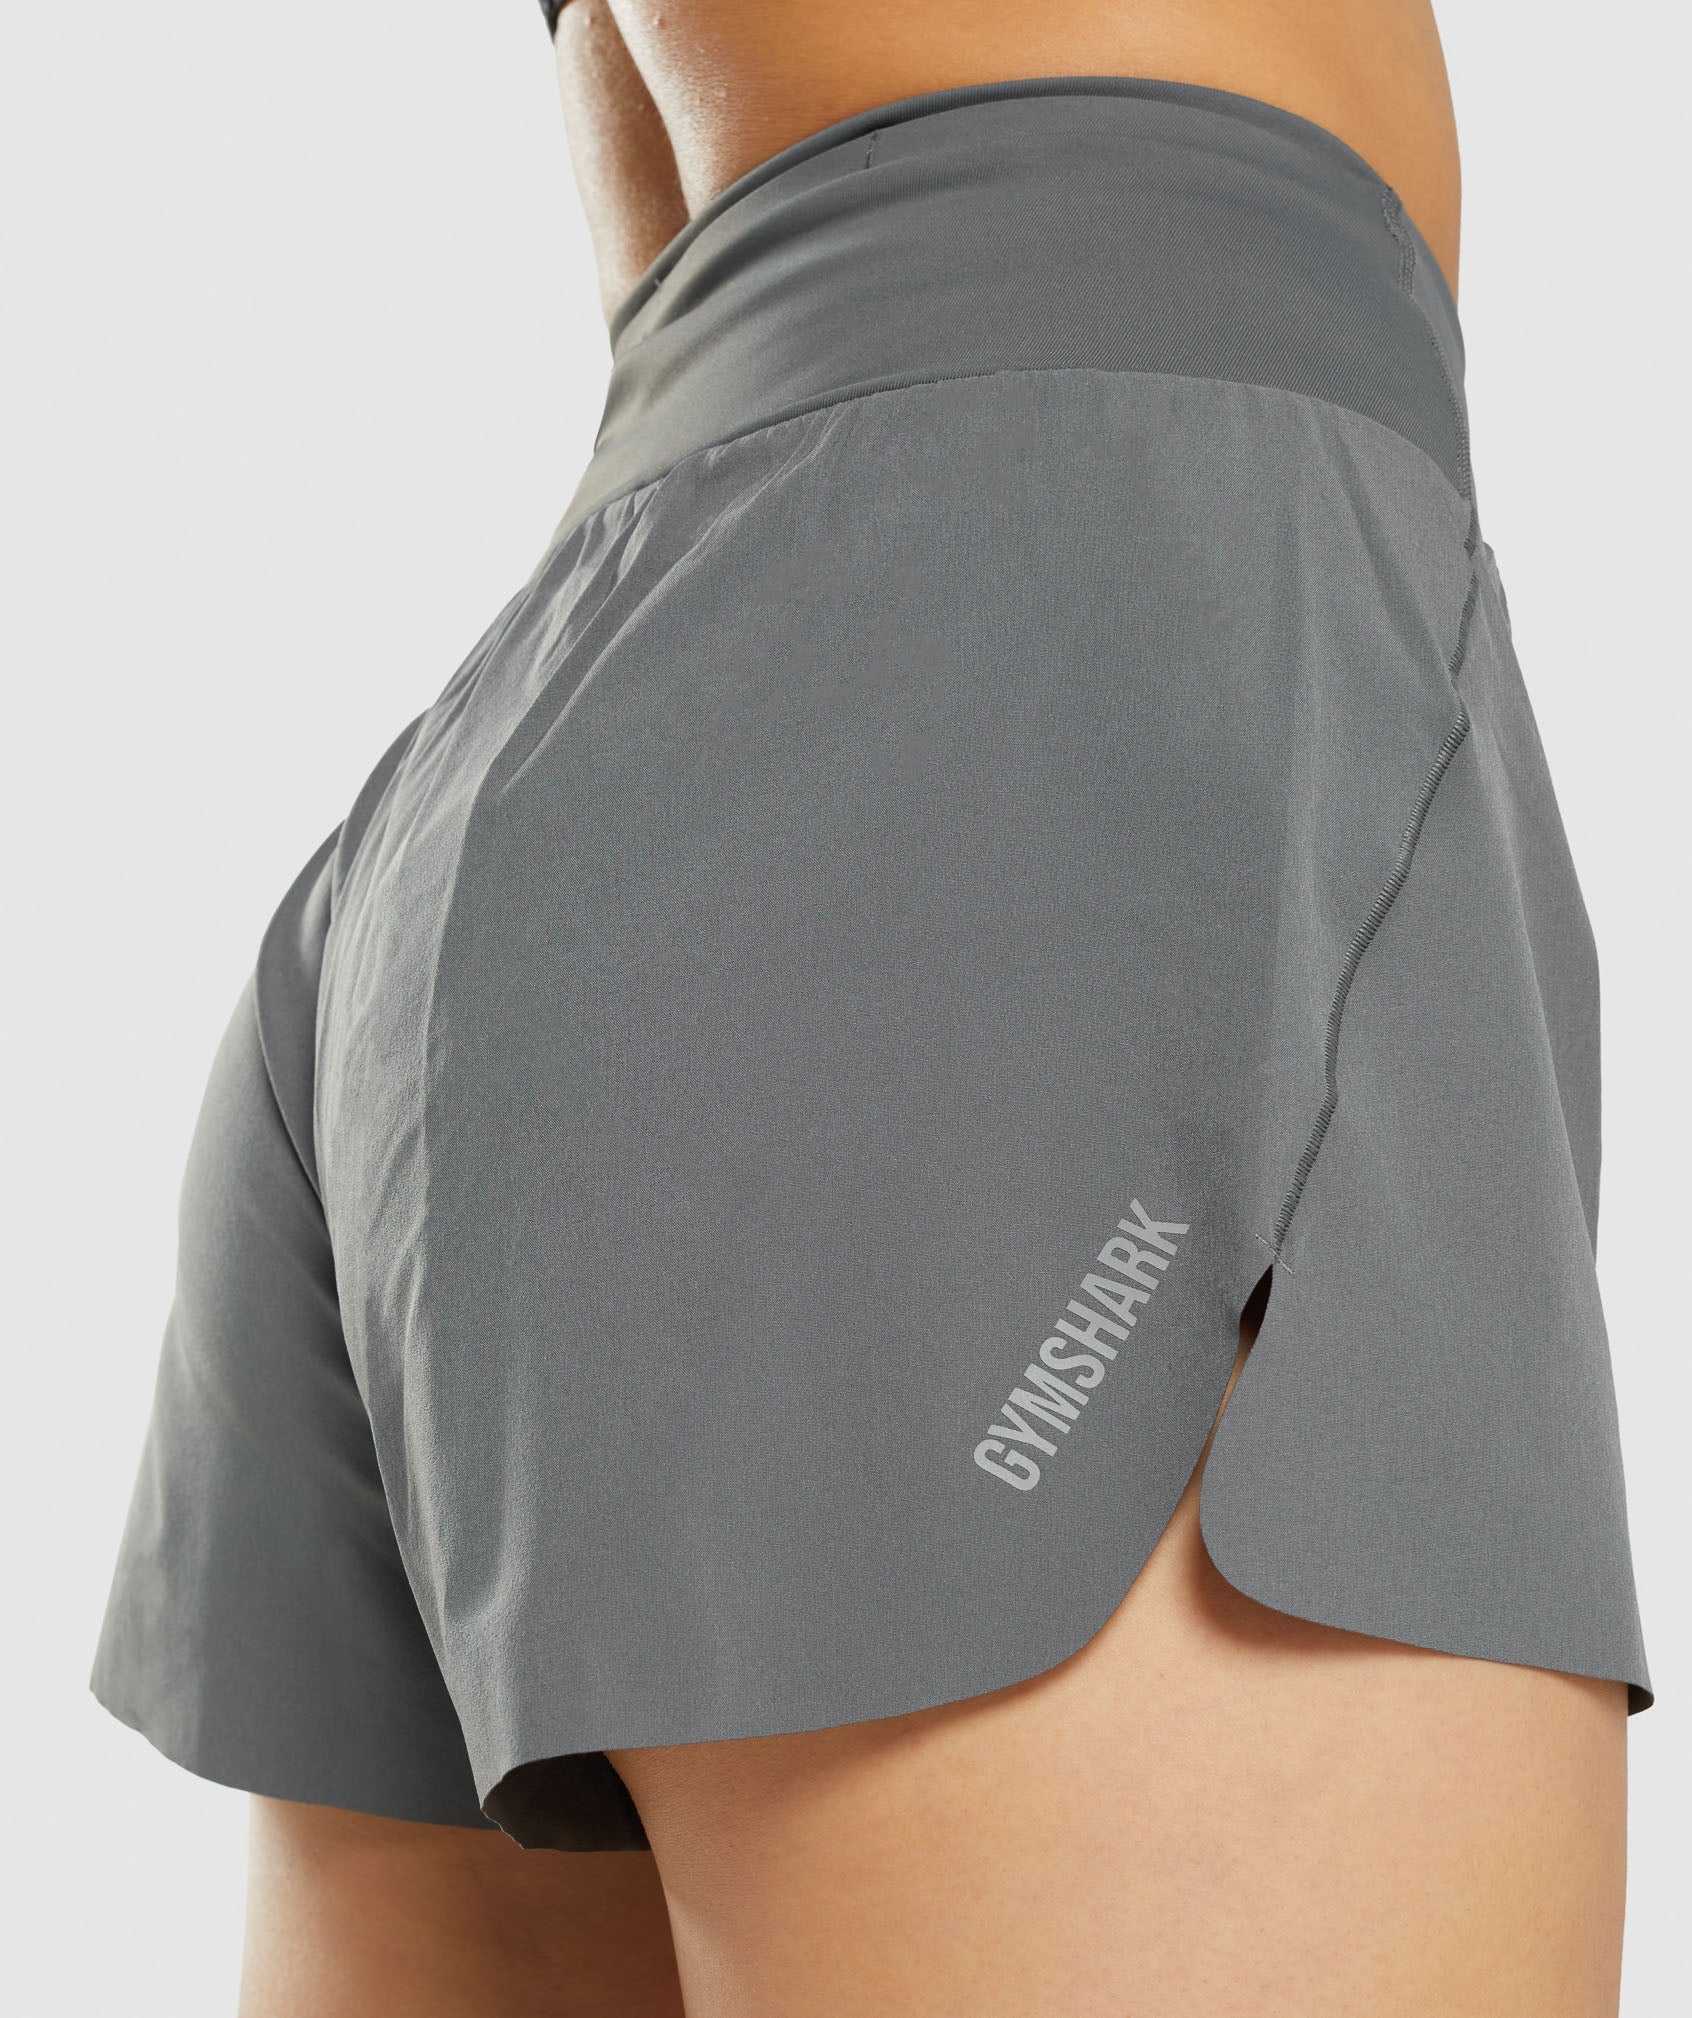 Speed Shorts in Grey - view 7